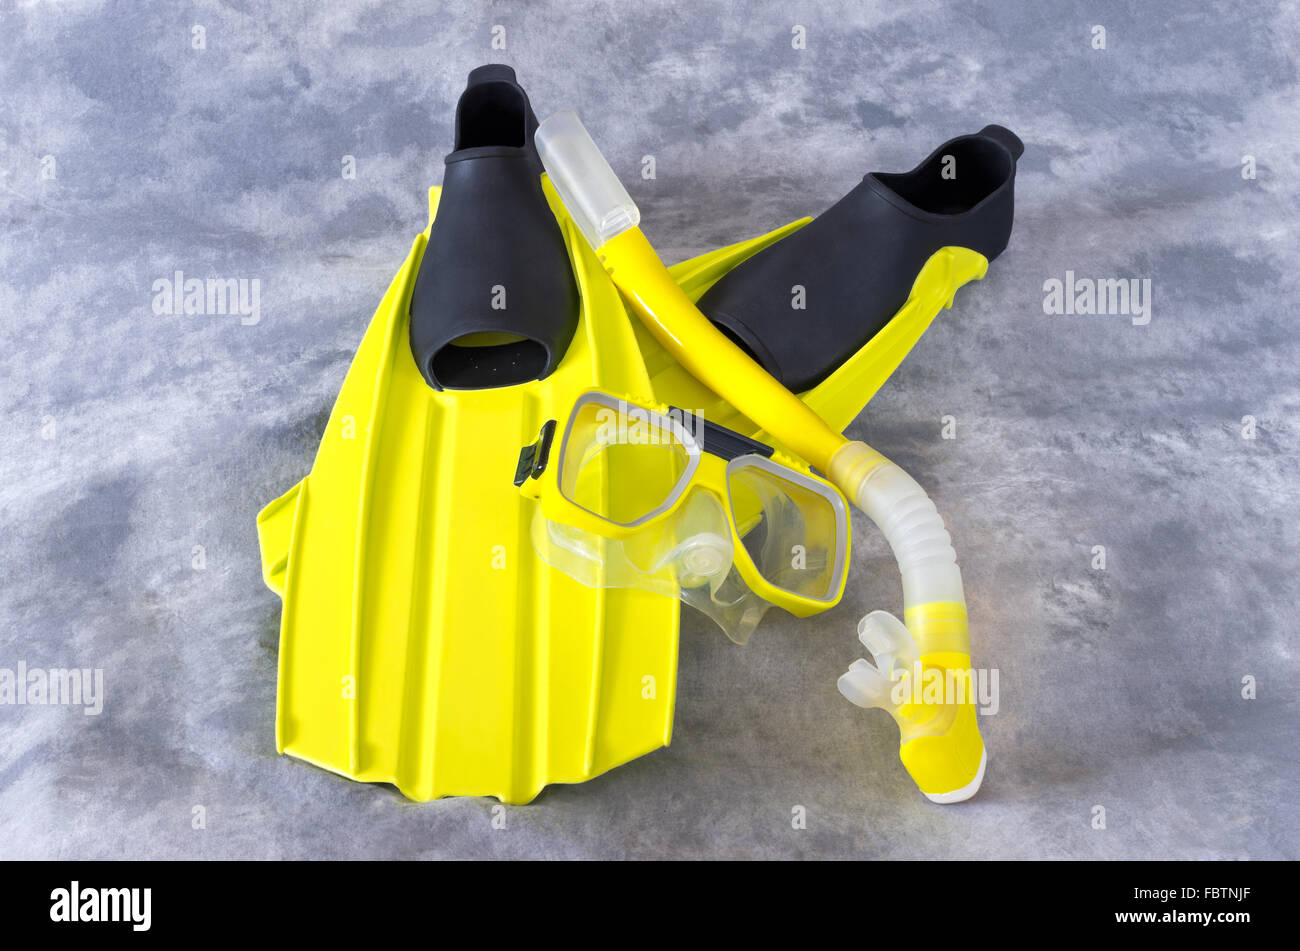 yellow snorkel mask and fins snorkeling gear isolated against gray background Stock Photo